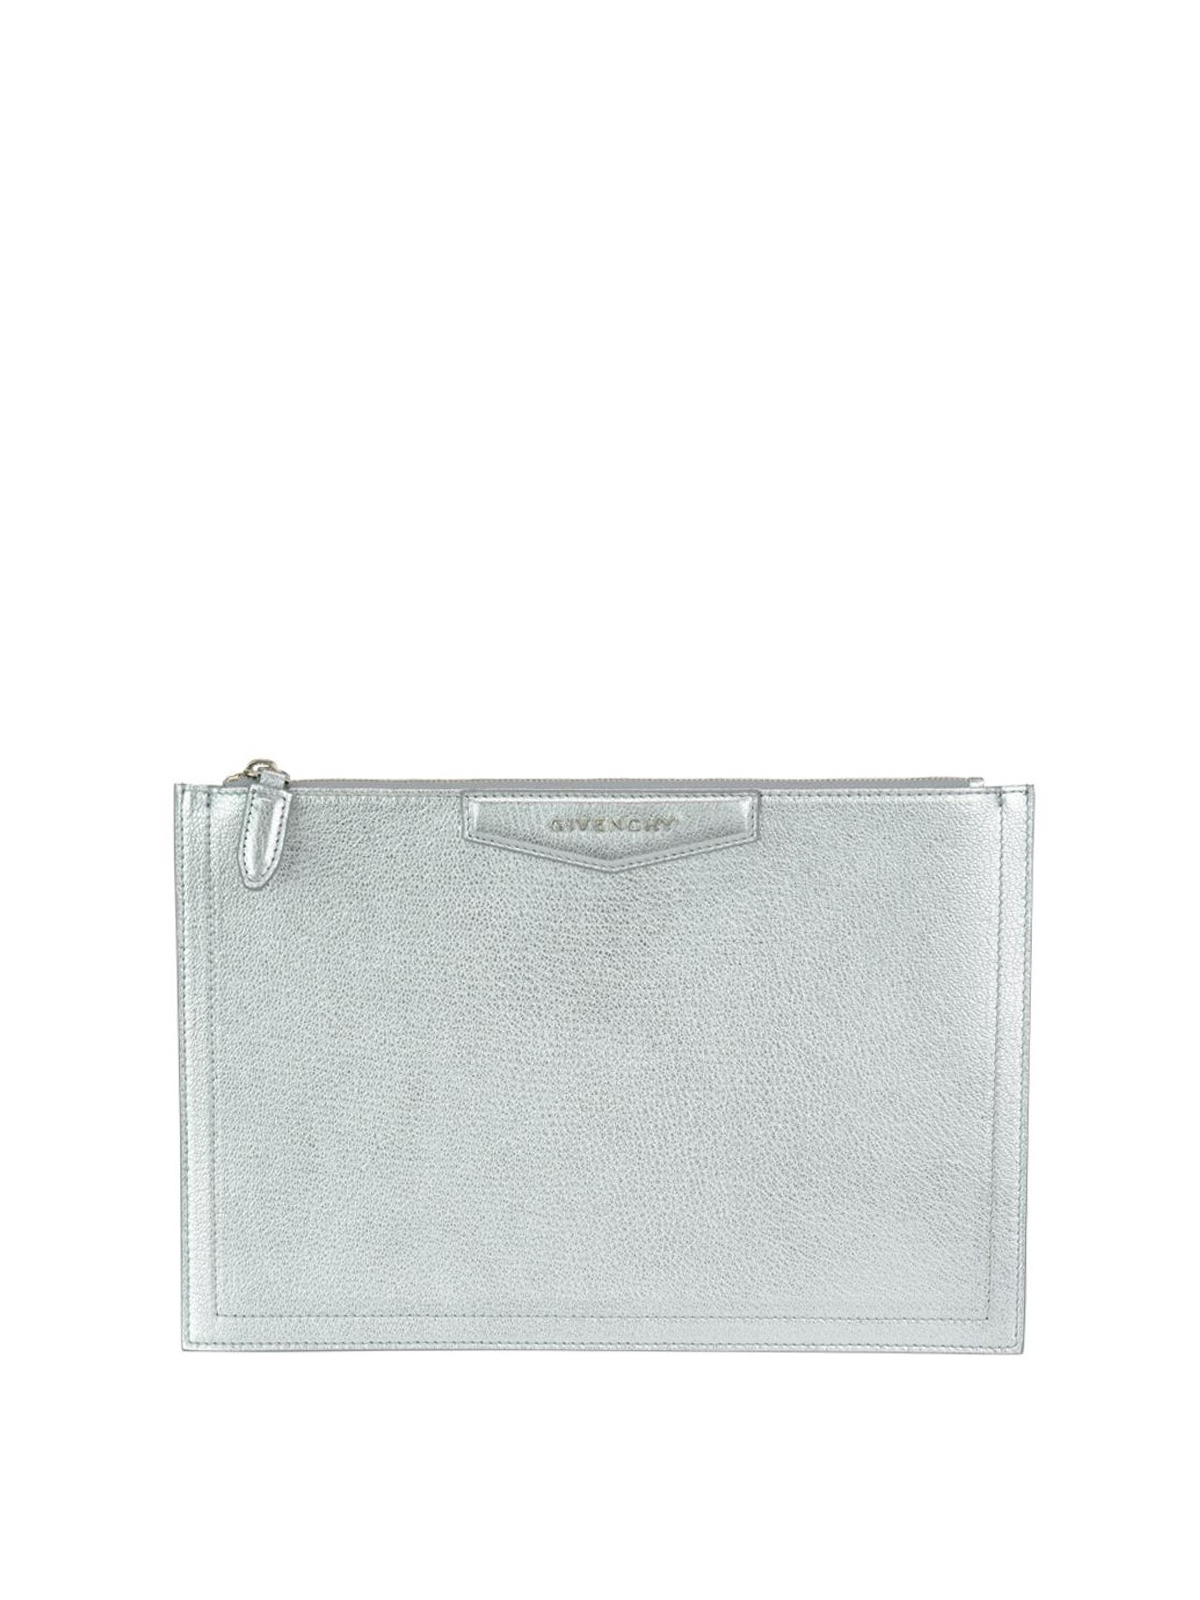 givenchy clutch